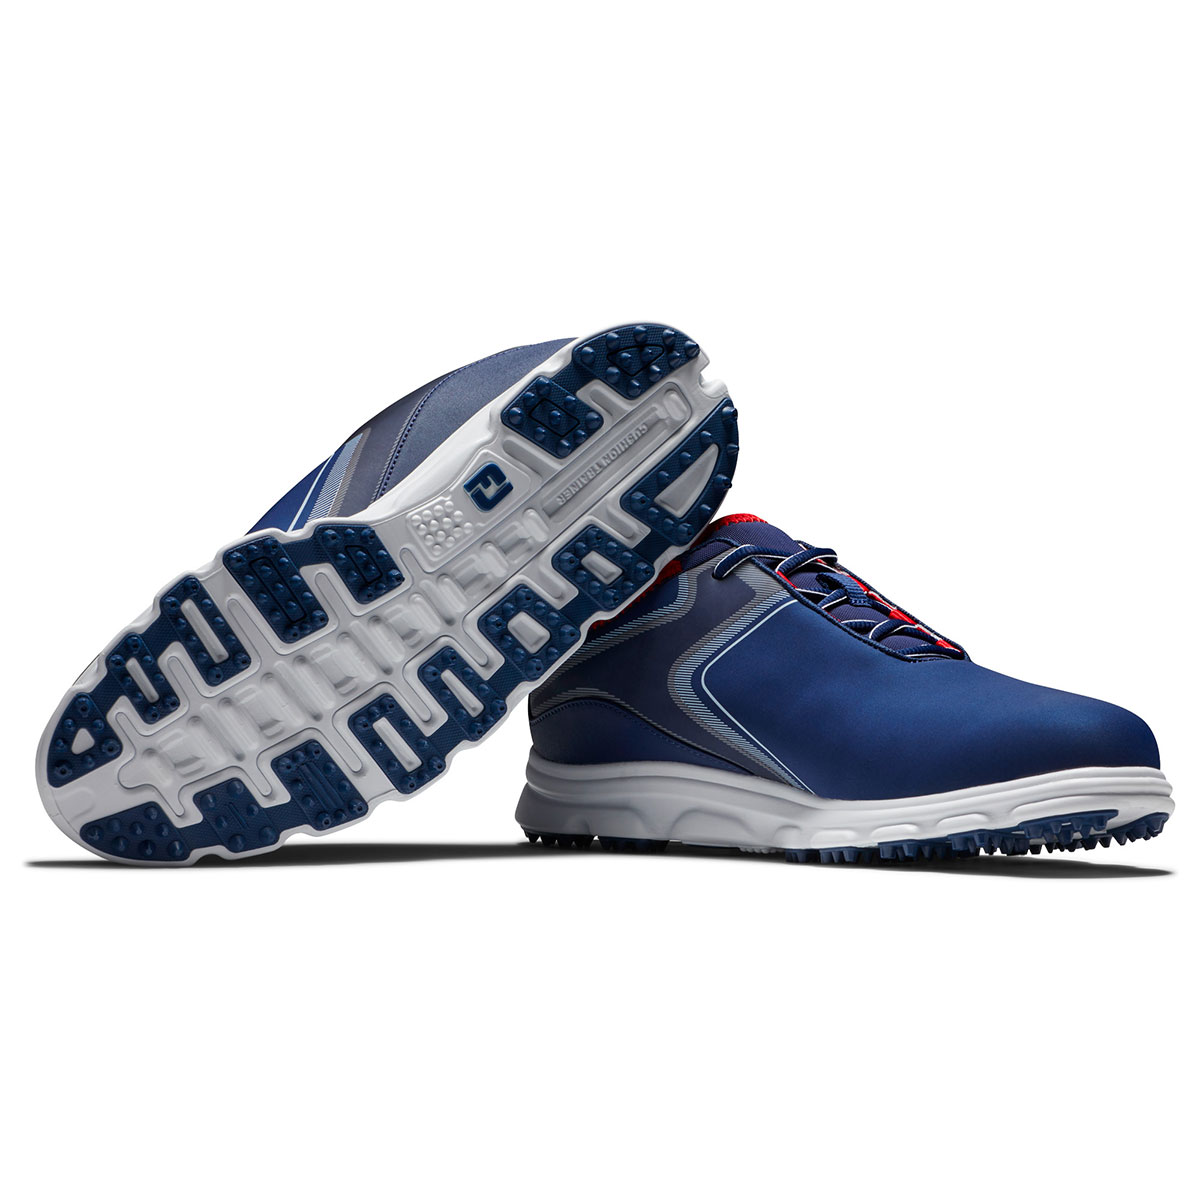 FootJoy Men's Superlites XP Spikeless Golf Shoes from american golf